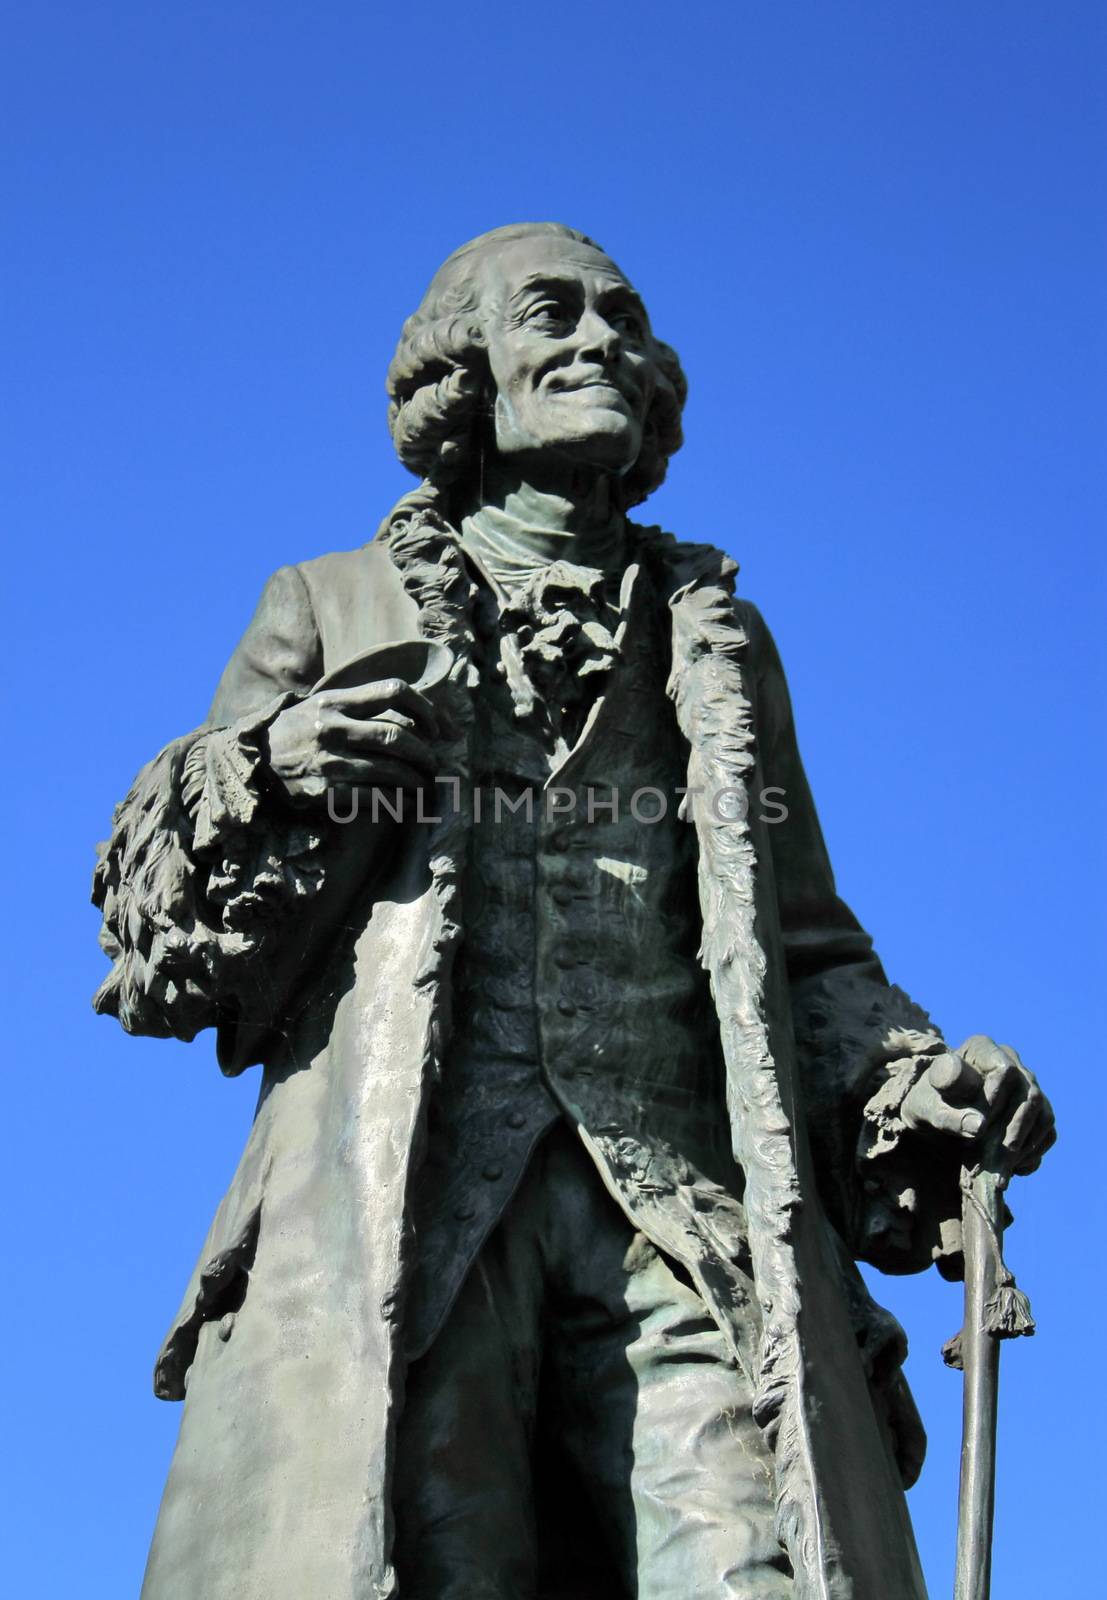 Ancient statue of the famous french philosopher Voltaire (1694-1778) at Ferney-Voltaire, France